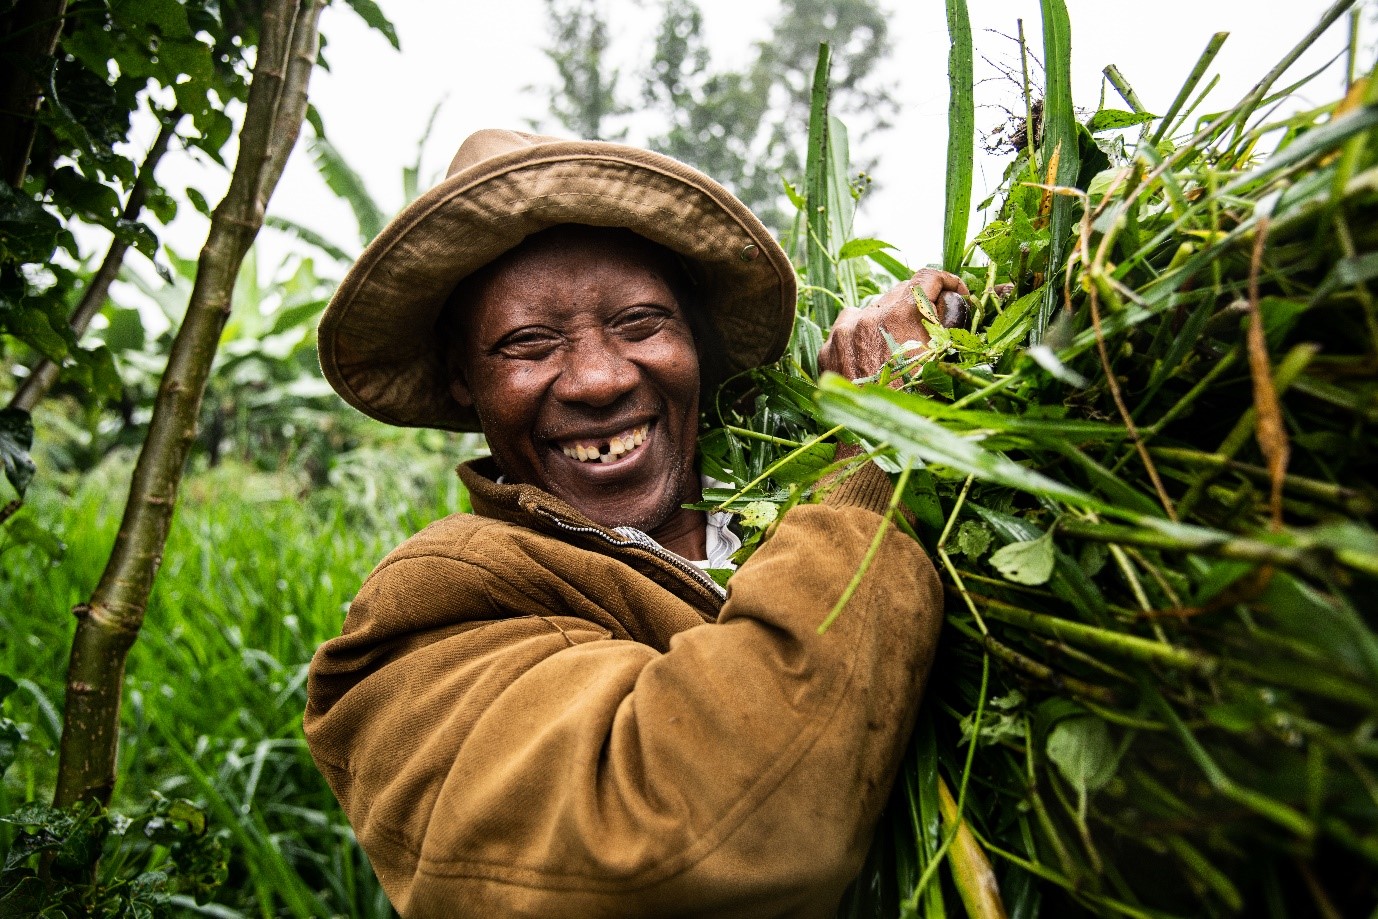 Simon Kiruja carrying cut grass for his dairy farm in Meru, Kenya. The family is among those who have received training and new technology like the Brachiaria fodder grass varieties to improve milk yields. (Photo: Georgina Smith).